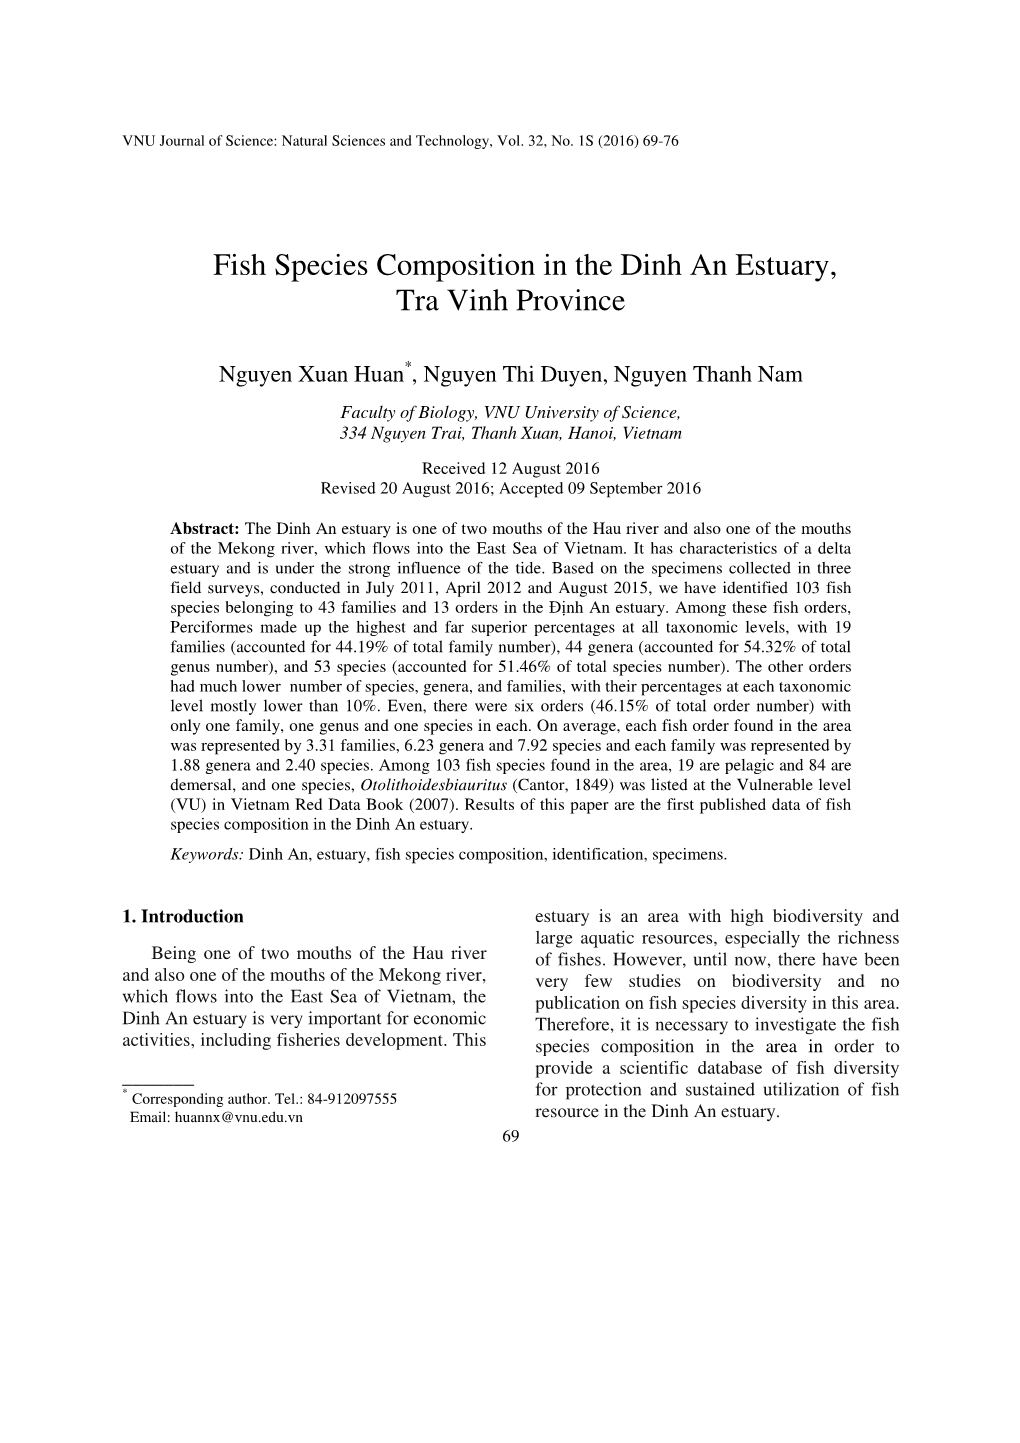 Fish Species Composition in the Dinh an Estuary, Tra Vinh Province